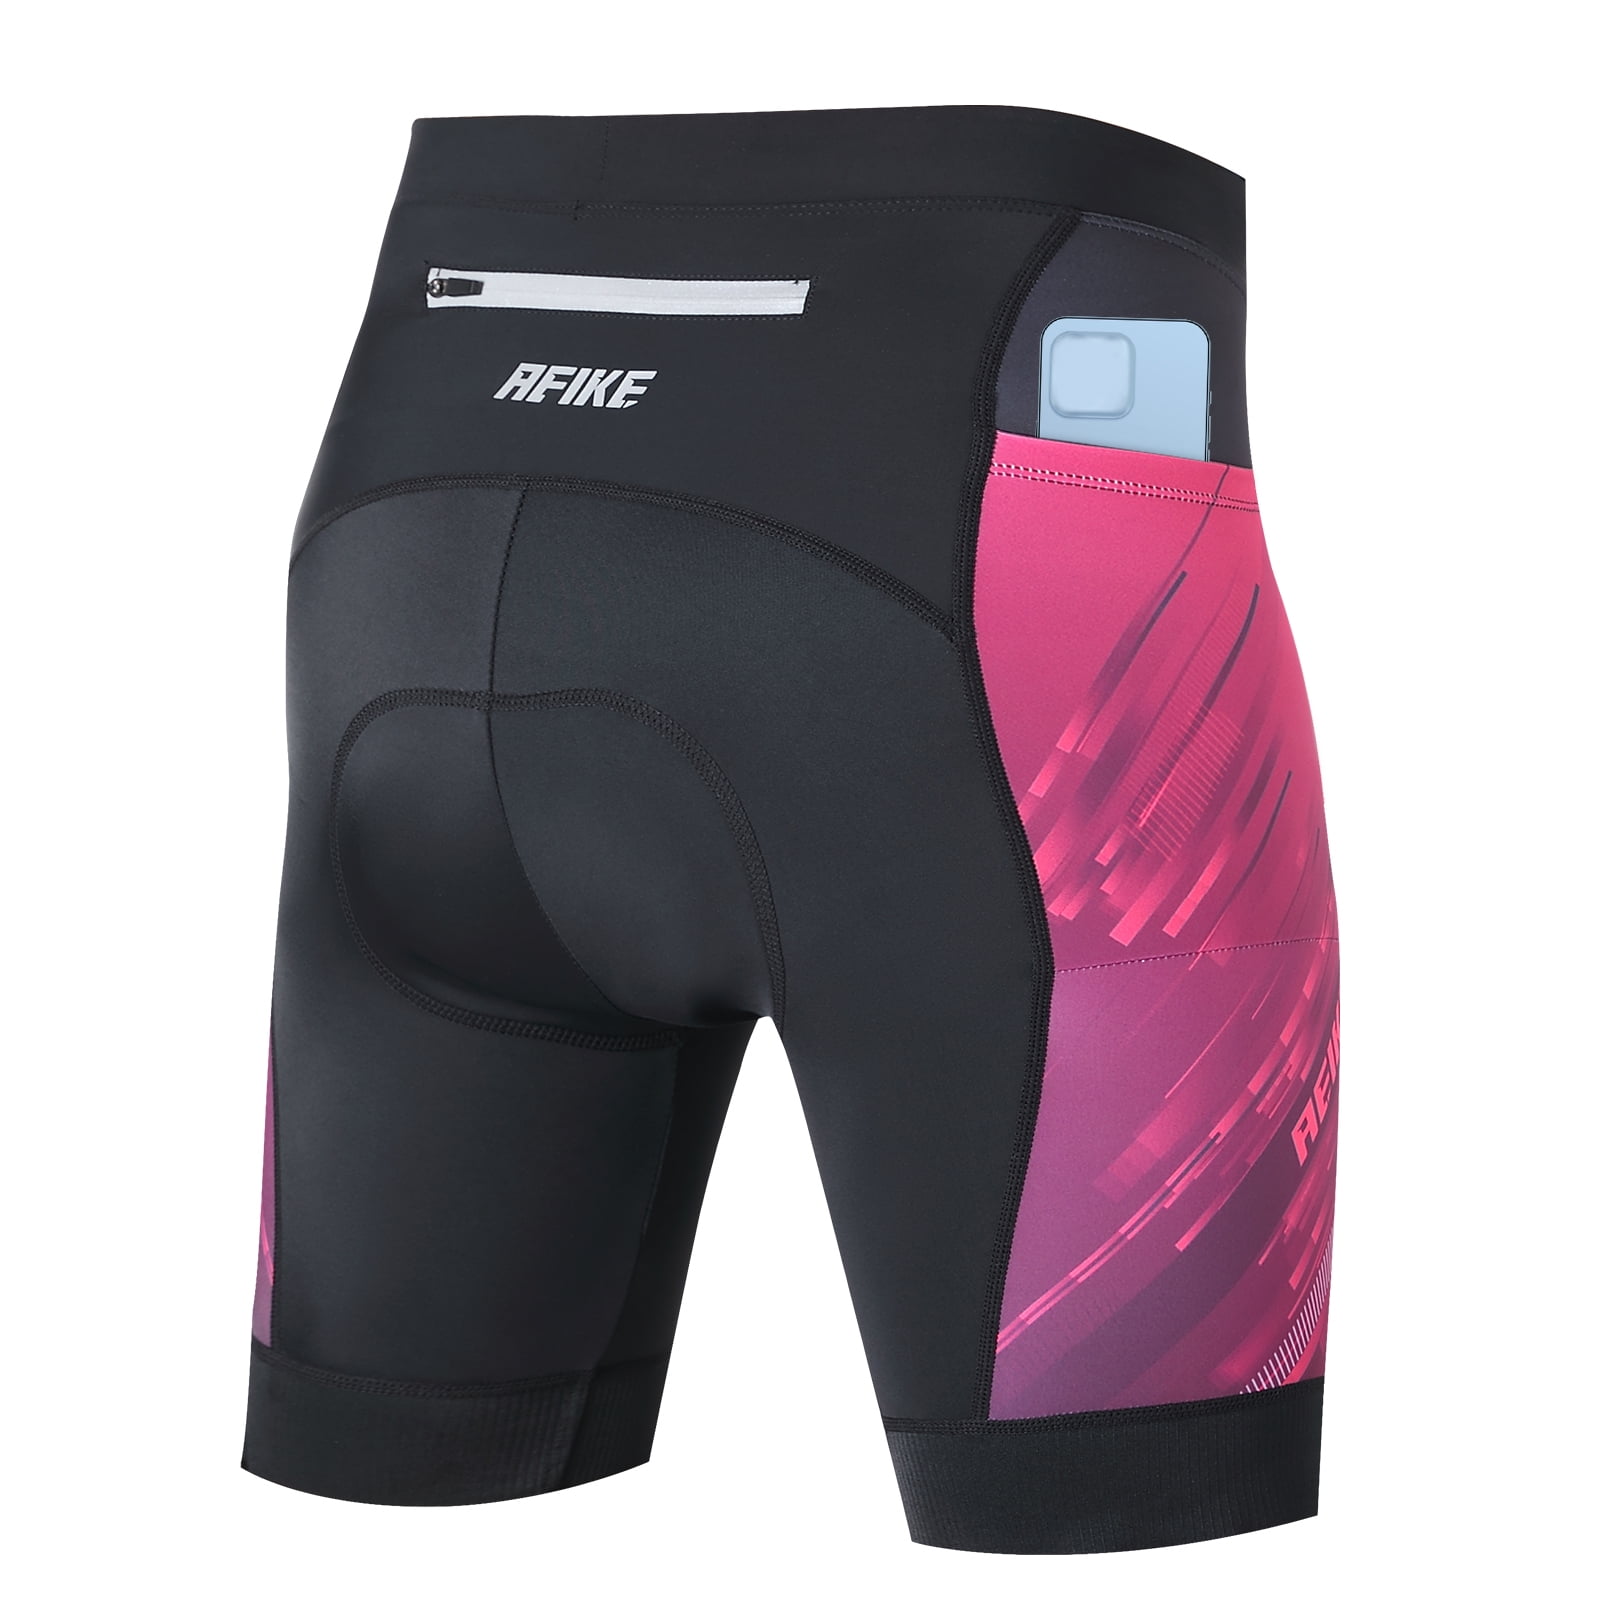 Aeike Women's Cycling Shorts Bike Shorts Padded Bicycle Tights For